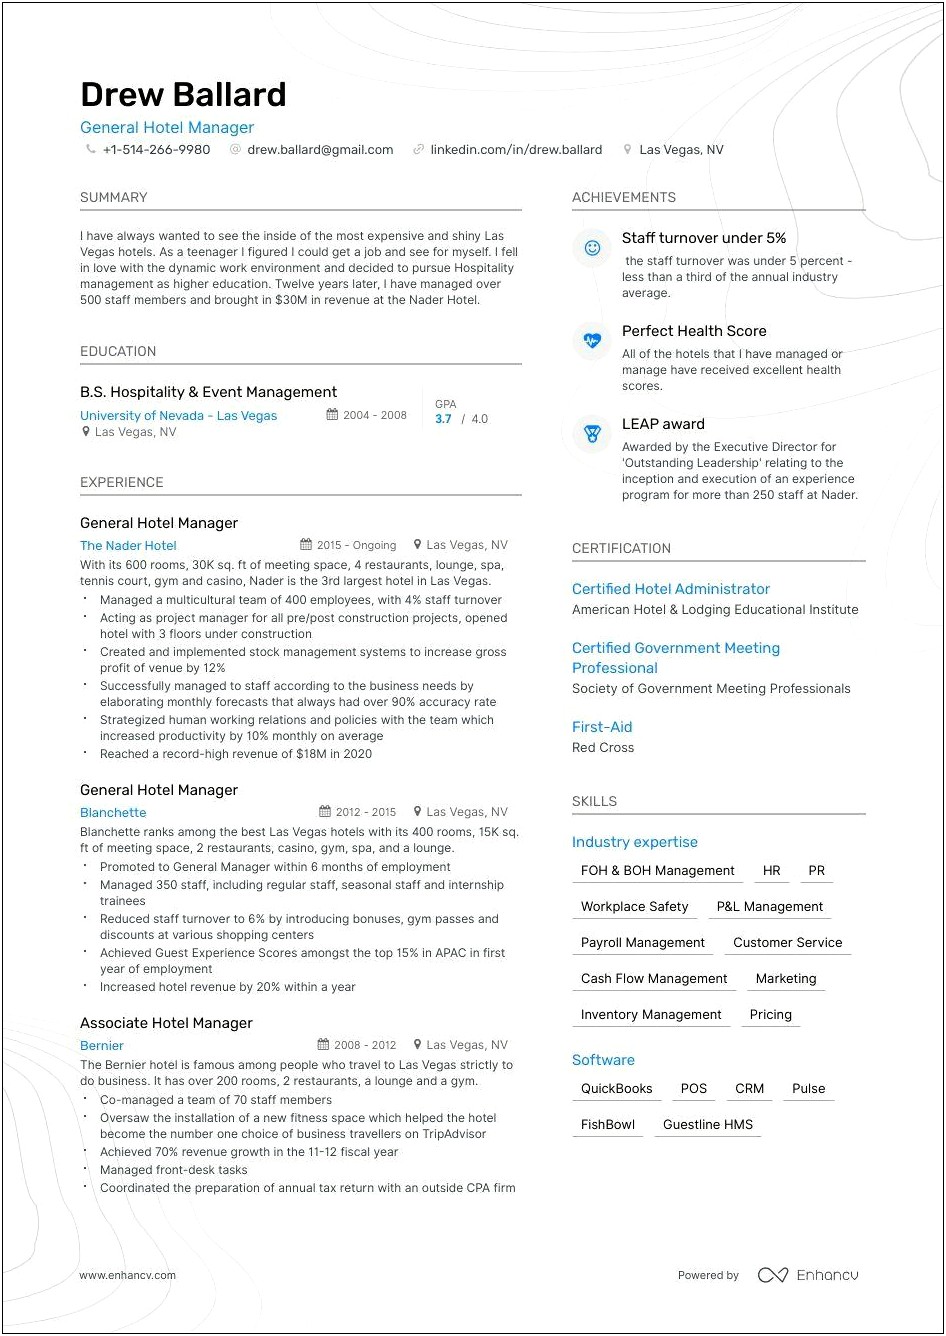 Summary Section Of Resume Example For General Manager